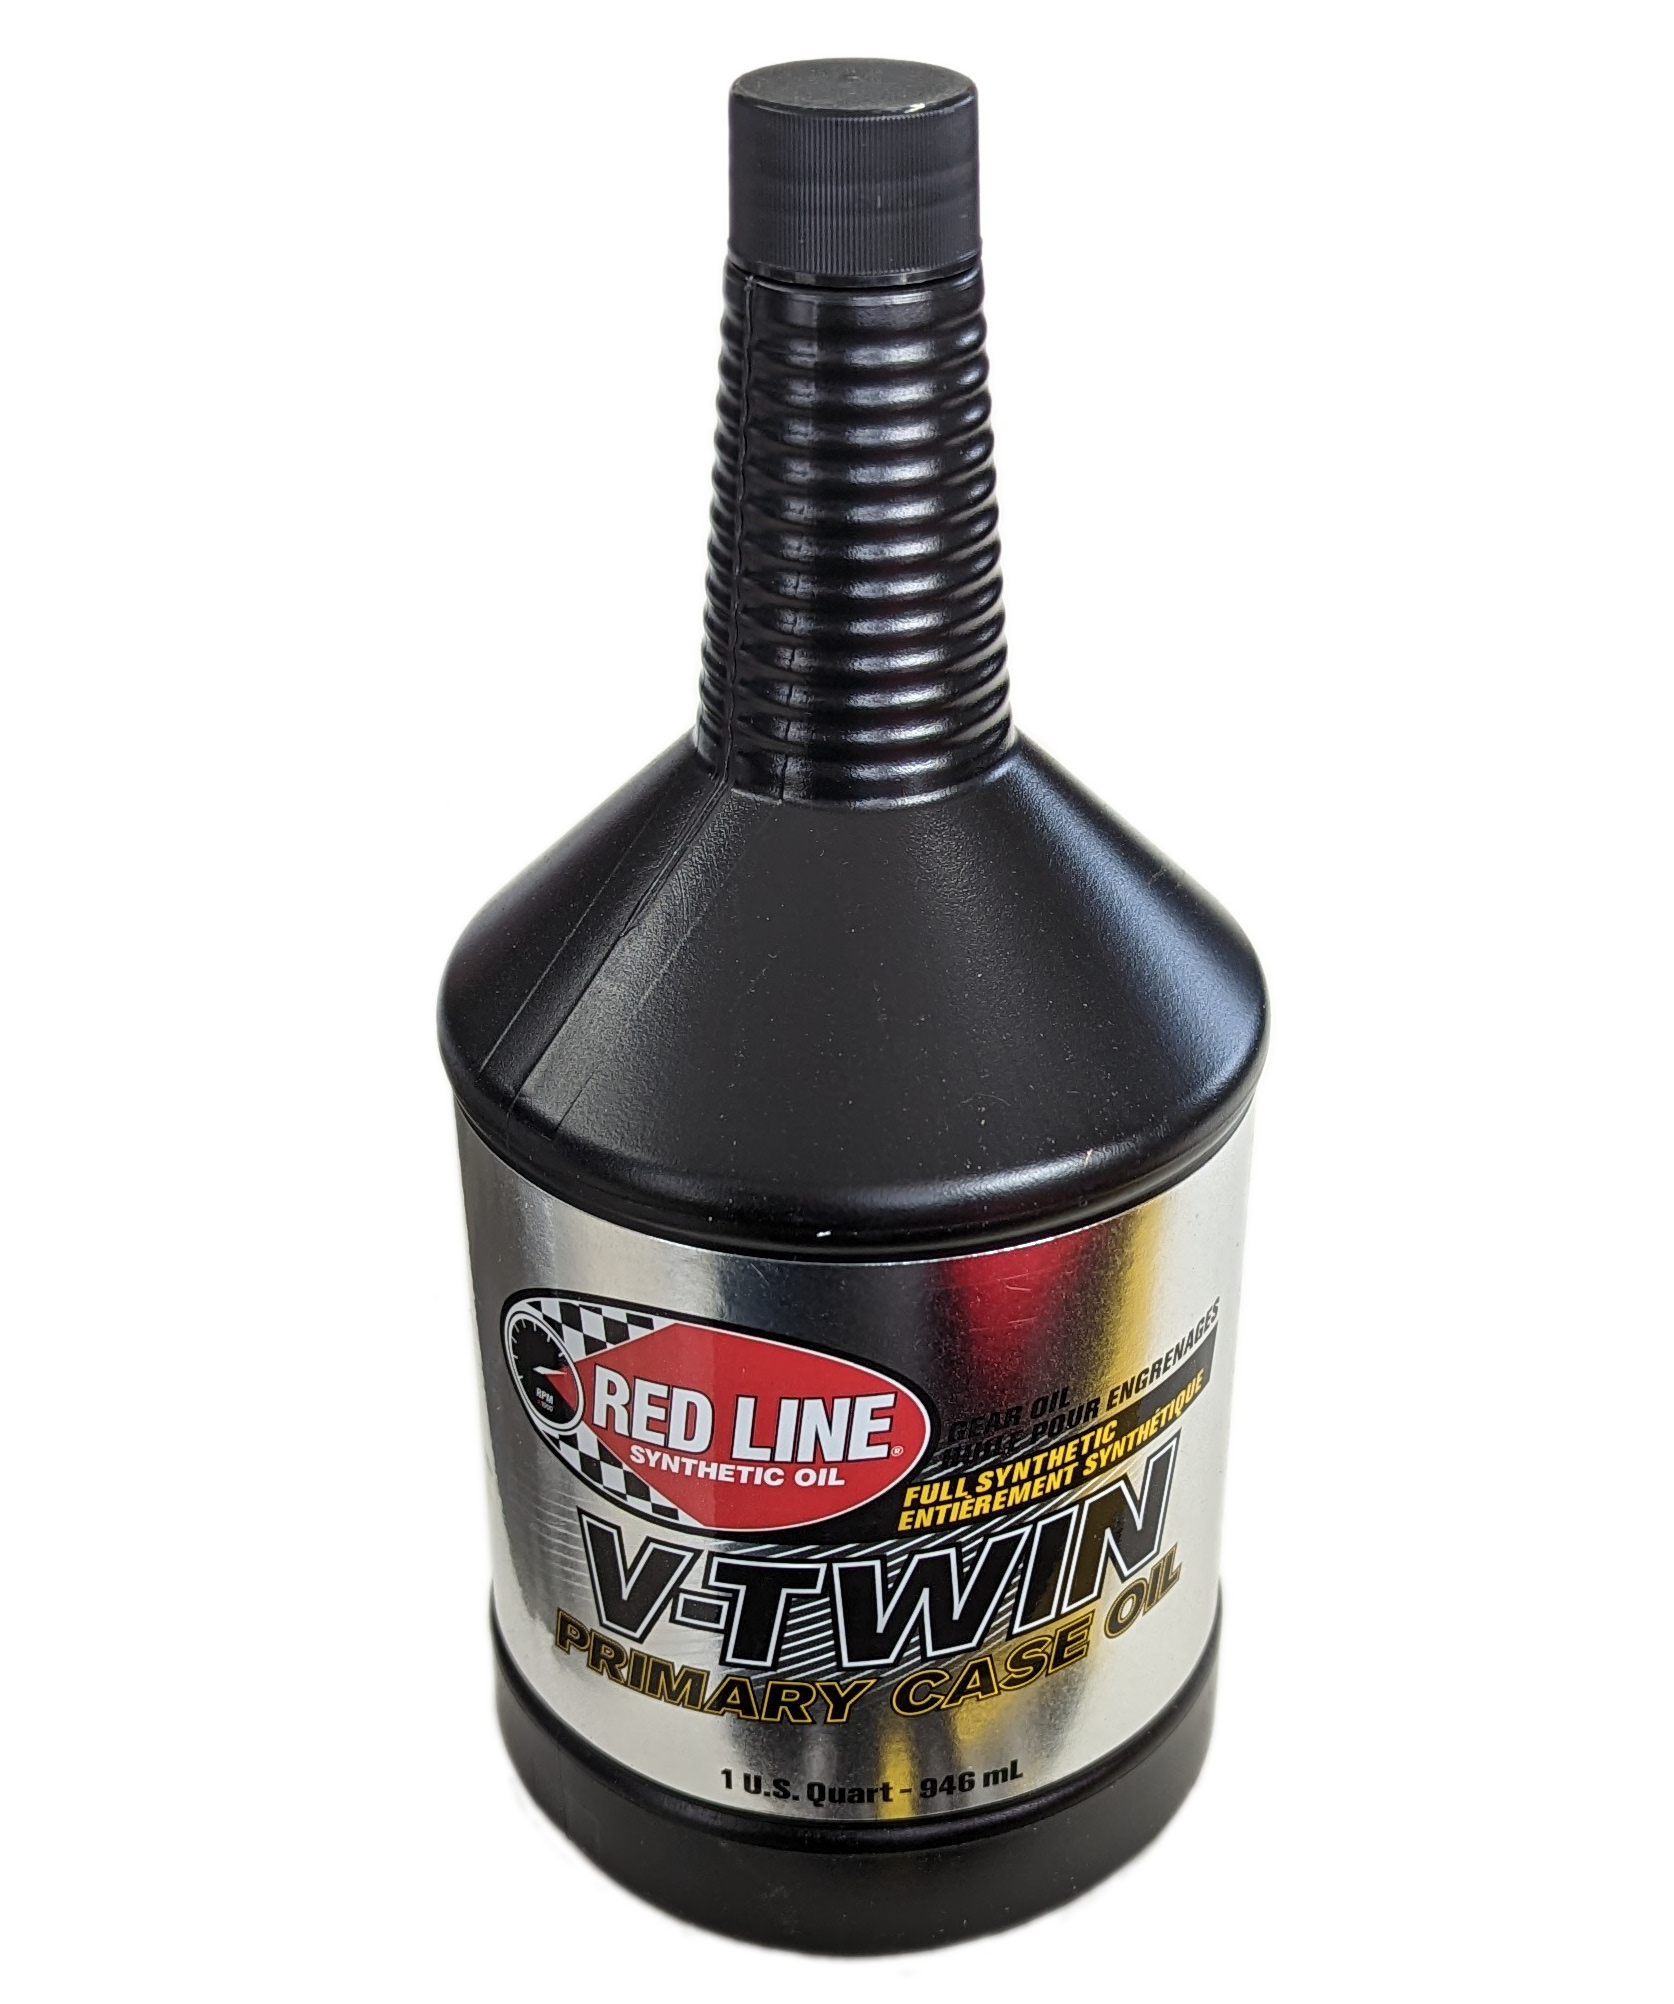 Big Twin Oil Change Powerpack 20W-50 - 5 Qts Oil + Primary + Trans - Click Image to Close